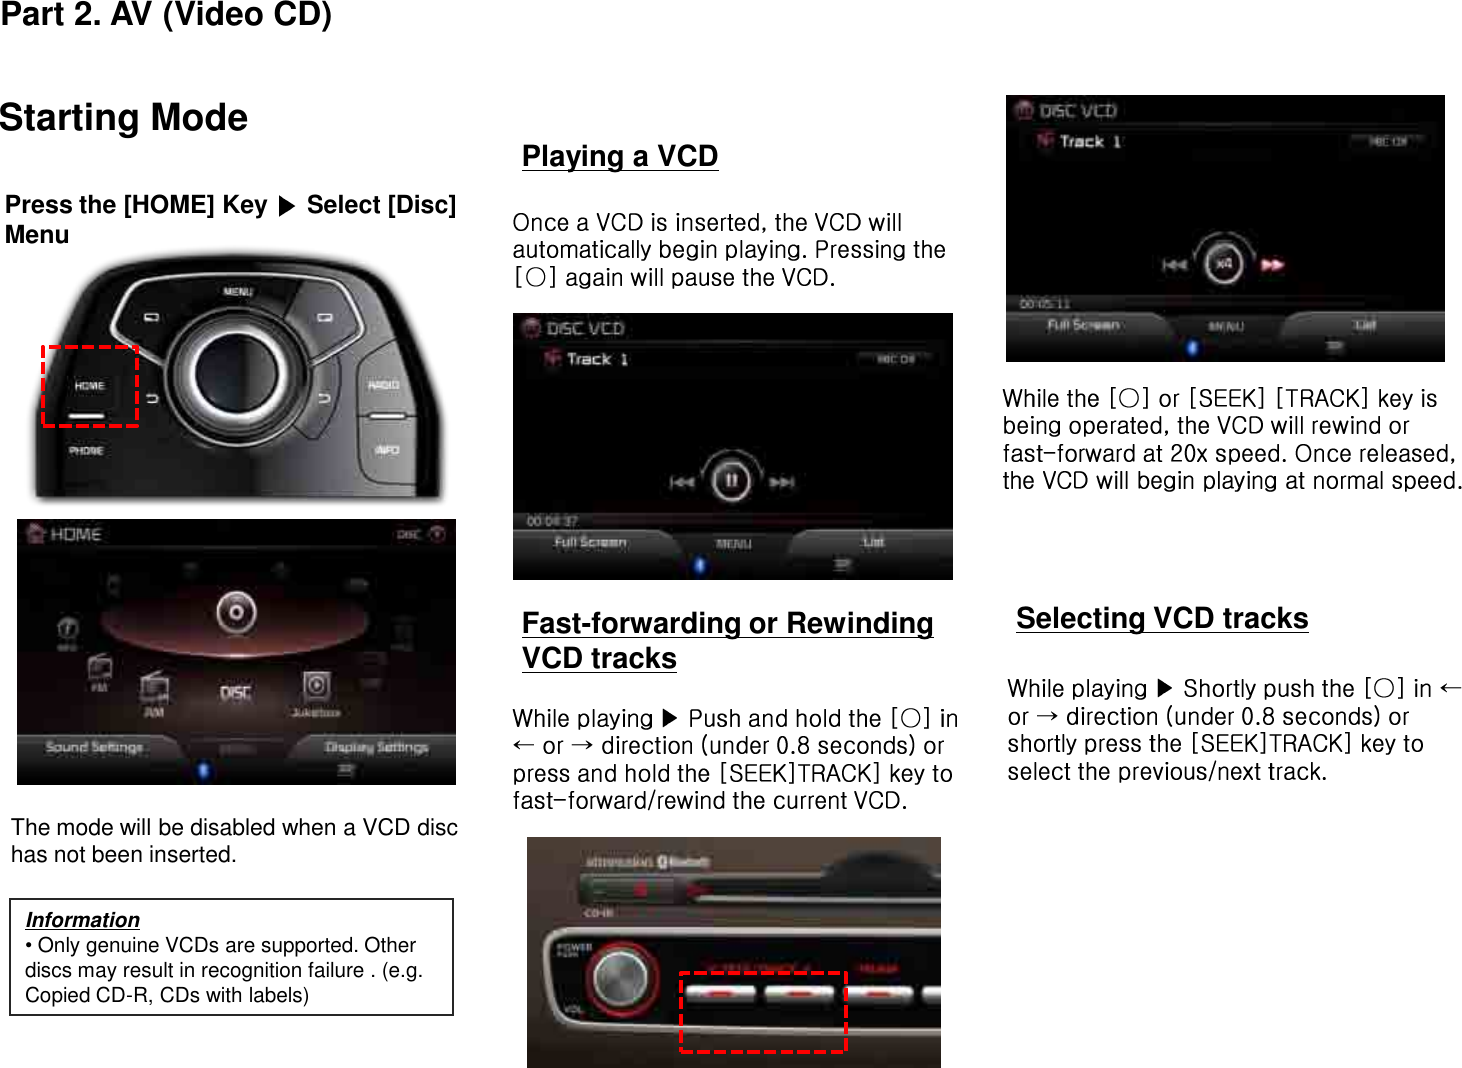 Starting ModeThe mode will be disabled when a VCD disc has not been inserted.Playing a VCDFast-forwarding or Rewinding VCD tracksSelecting VCD tracksInformation•Only genuine VCDs are supported. Other discs may result in recognition failure . (e.g. Copied CD-R, CDs with labels)Press the [HOME] Key Select [Disc] MenuPart 2. AV (Video CD)